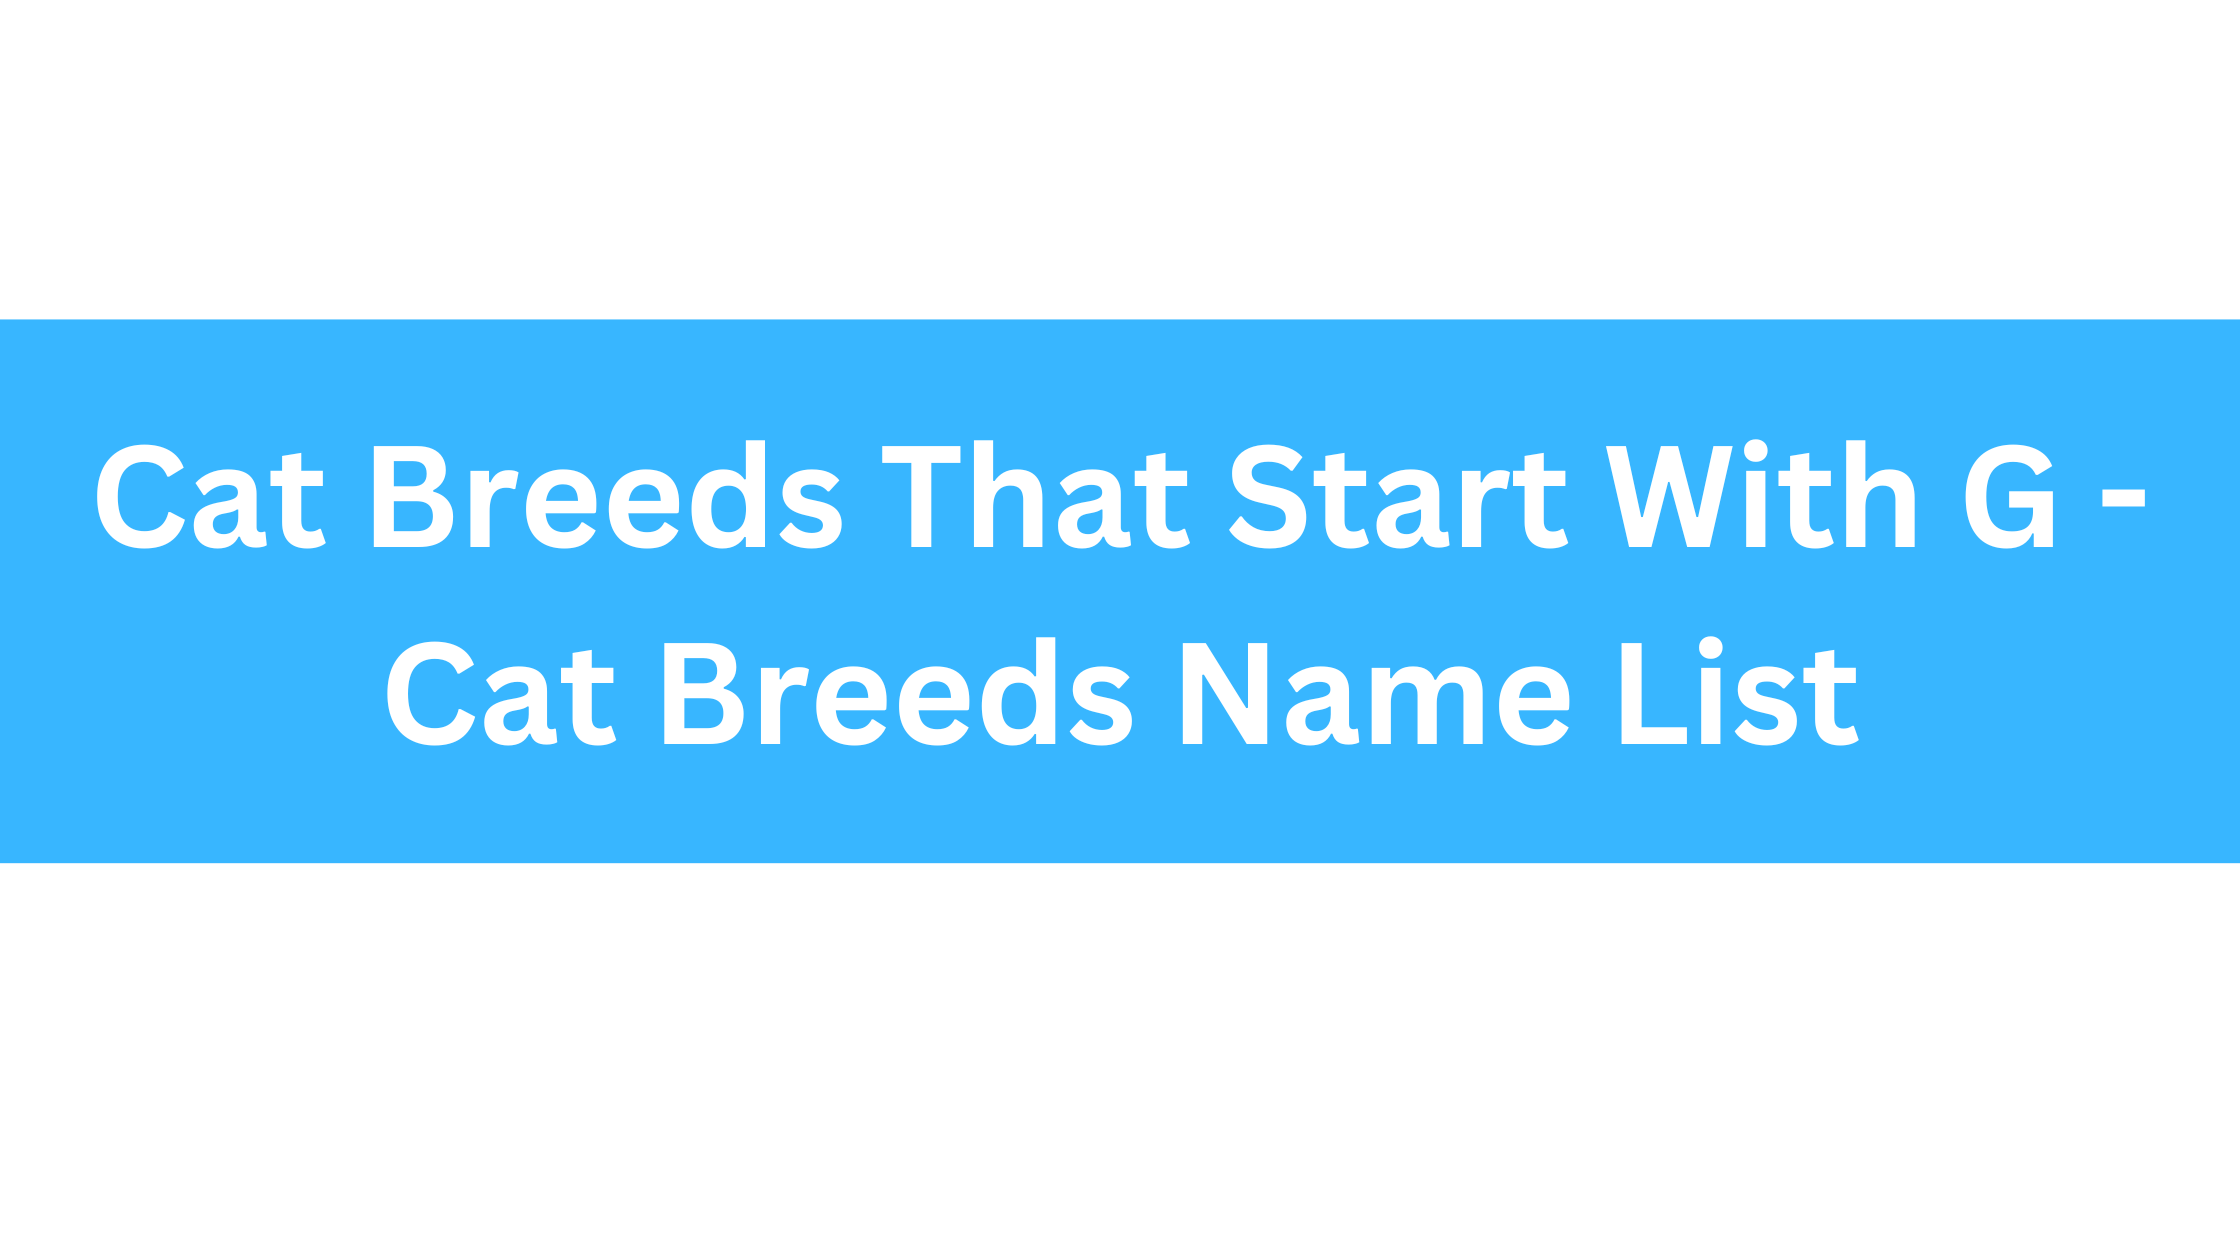 Cat Breeds That Start With G